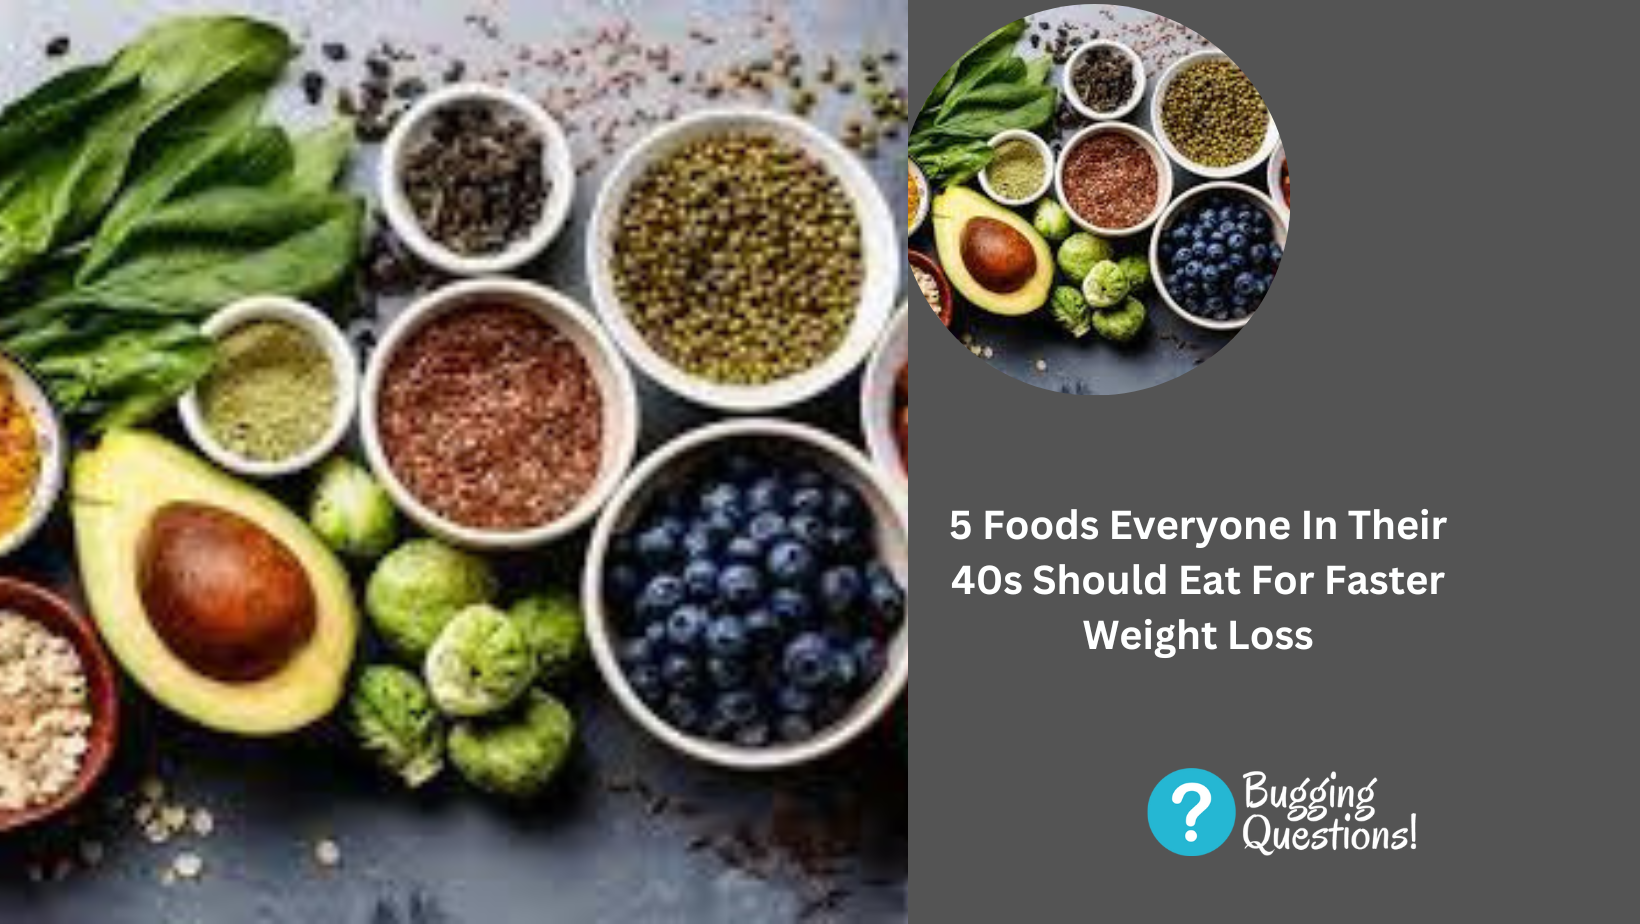 5 Foods Everyone In Their 40s Should Eat For Faster Weight Loss- Here Is What To Know